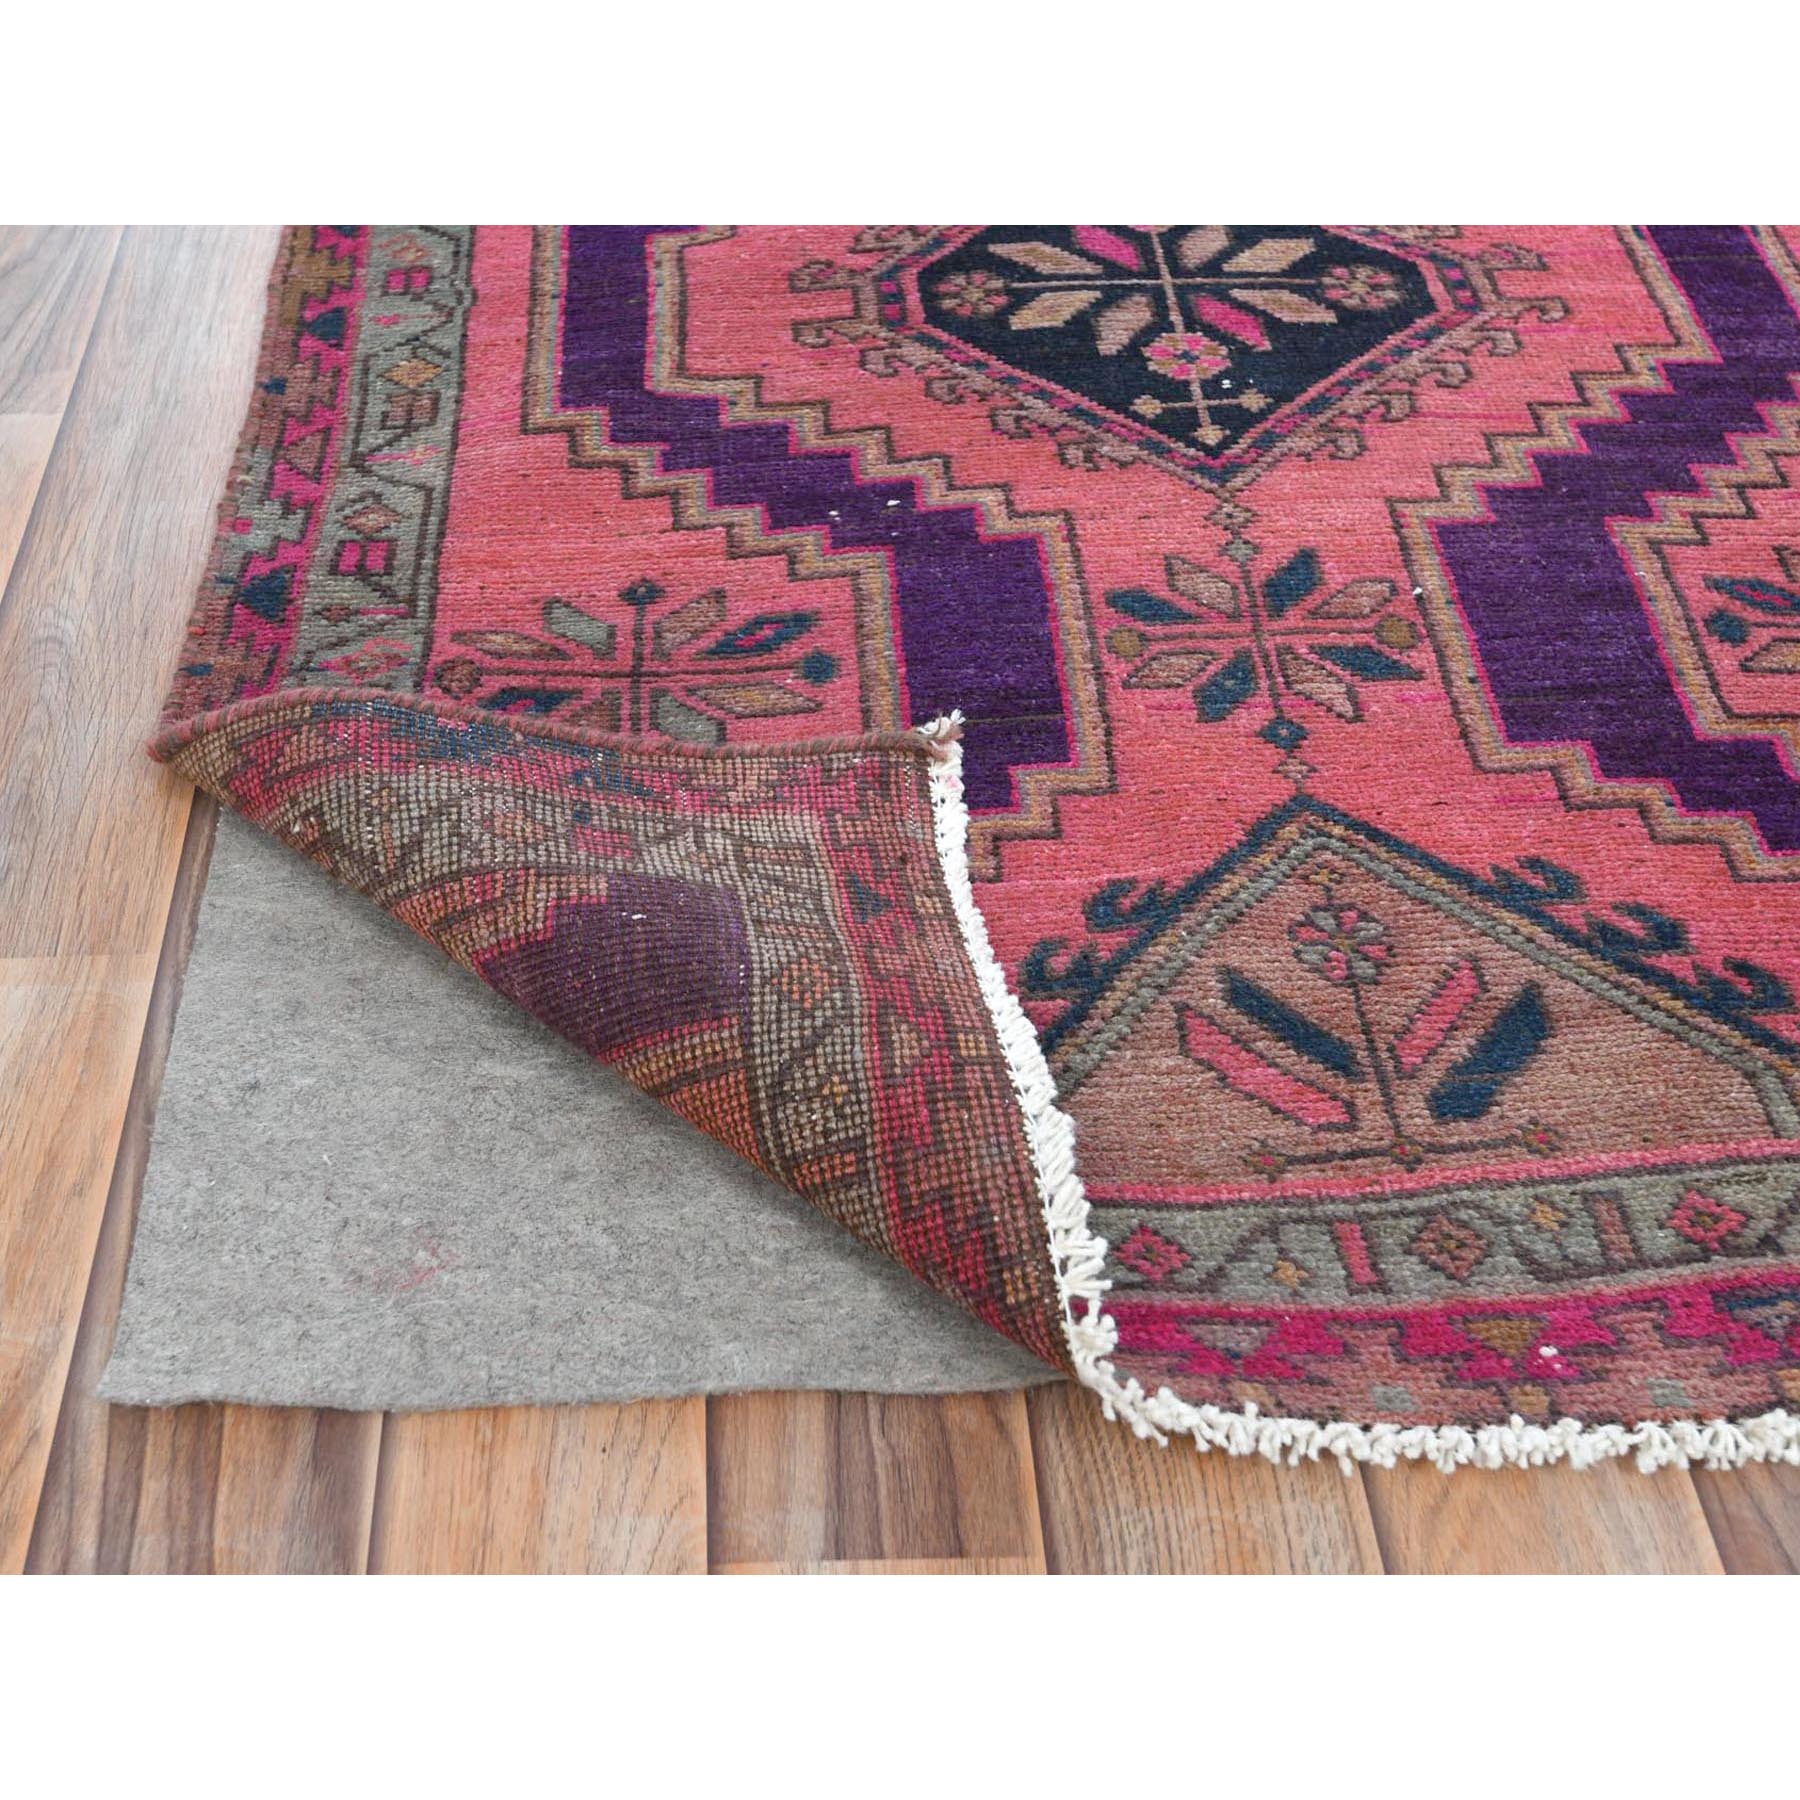 3'x9'3" Pink with Shades of Purple, Vintage Persian Hamadan, Distressed, Worn Down, Hand Woven Pure Wool Wide Runner Oriental Rug 